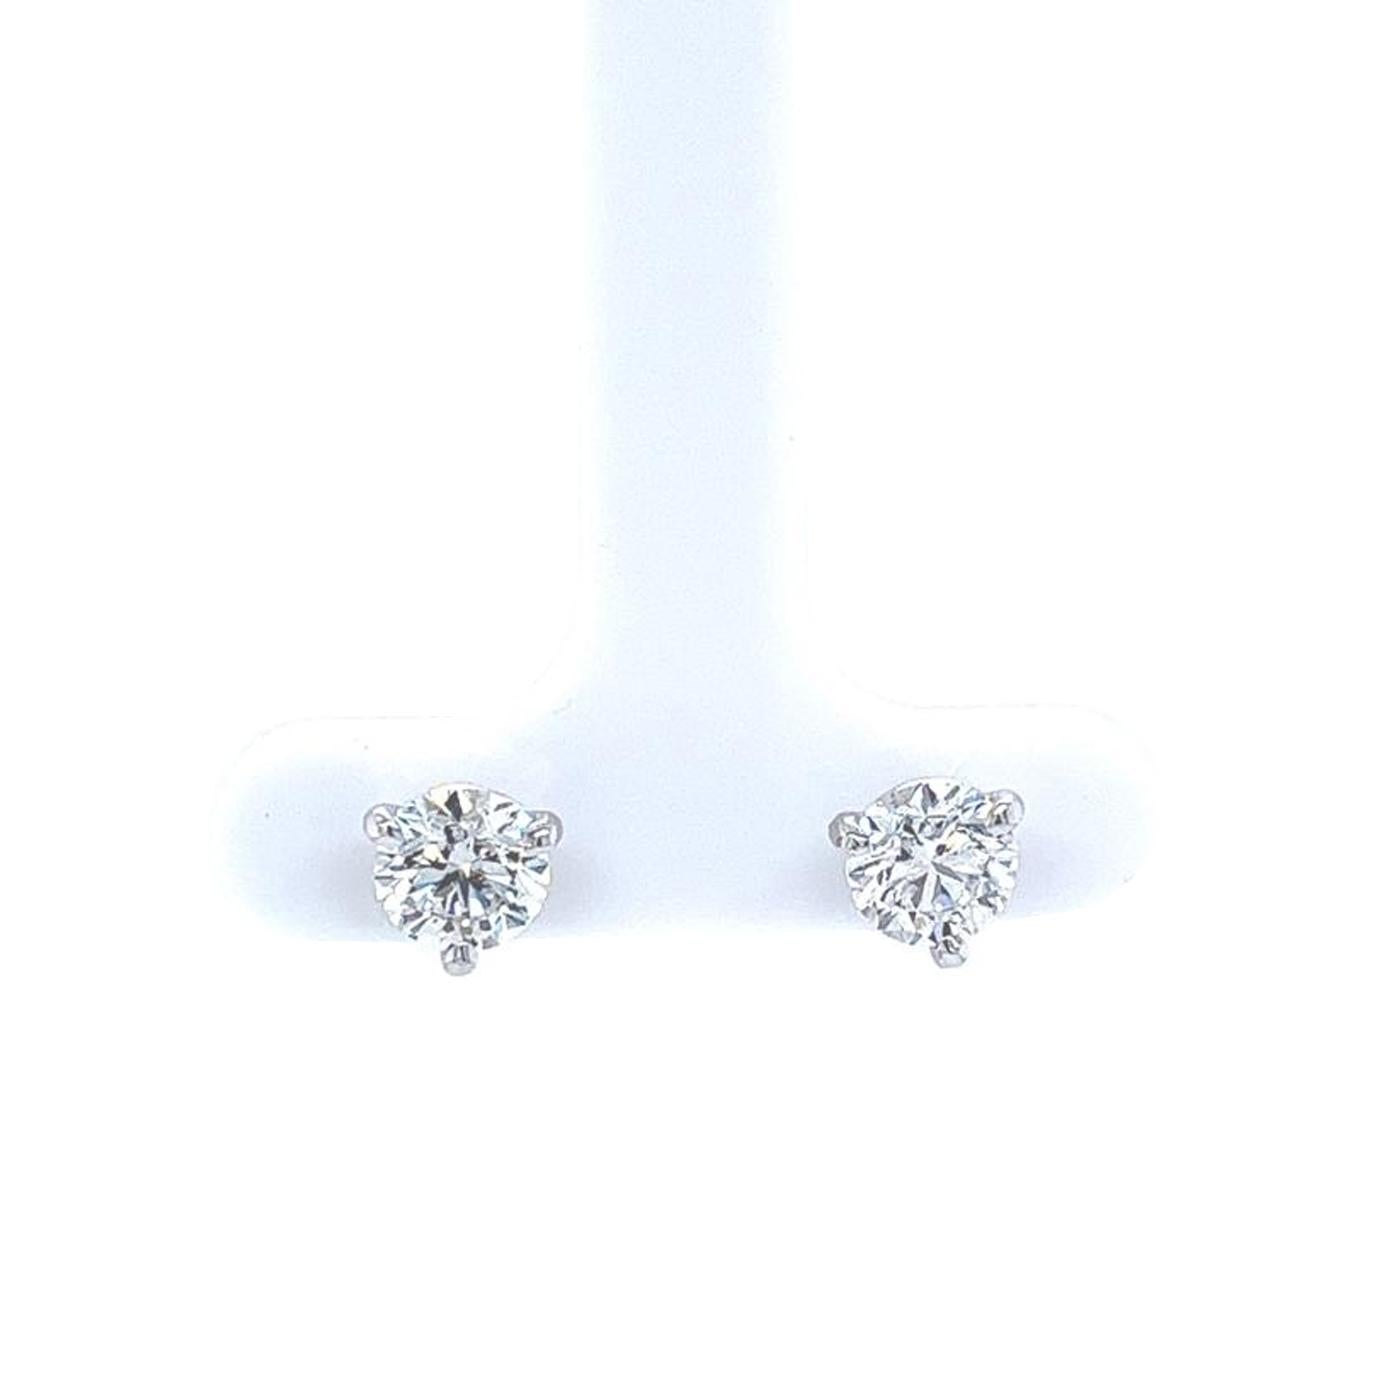 These Diamond stud earrings feature two round brilliant cut diamonds, totaling 1.80ctw. They are mounted in 3-prong martini mountings. The first diamond weighs 0.90ct and is graded by the GIA as Very Good cut, E color, and SI1 clarity with GIA